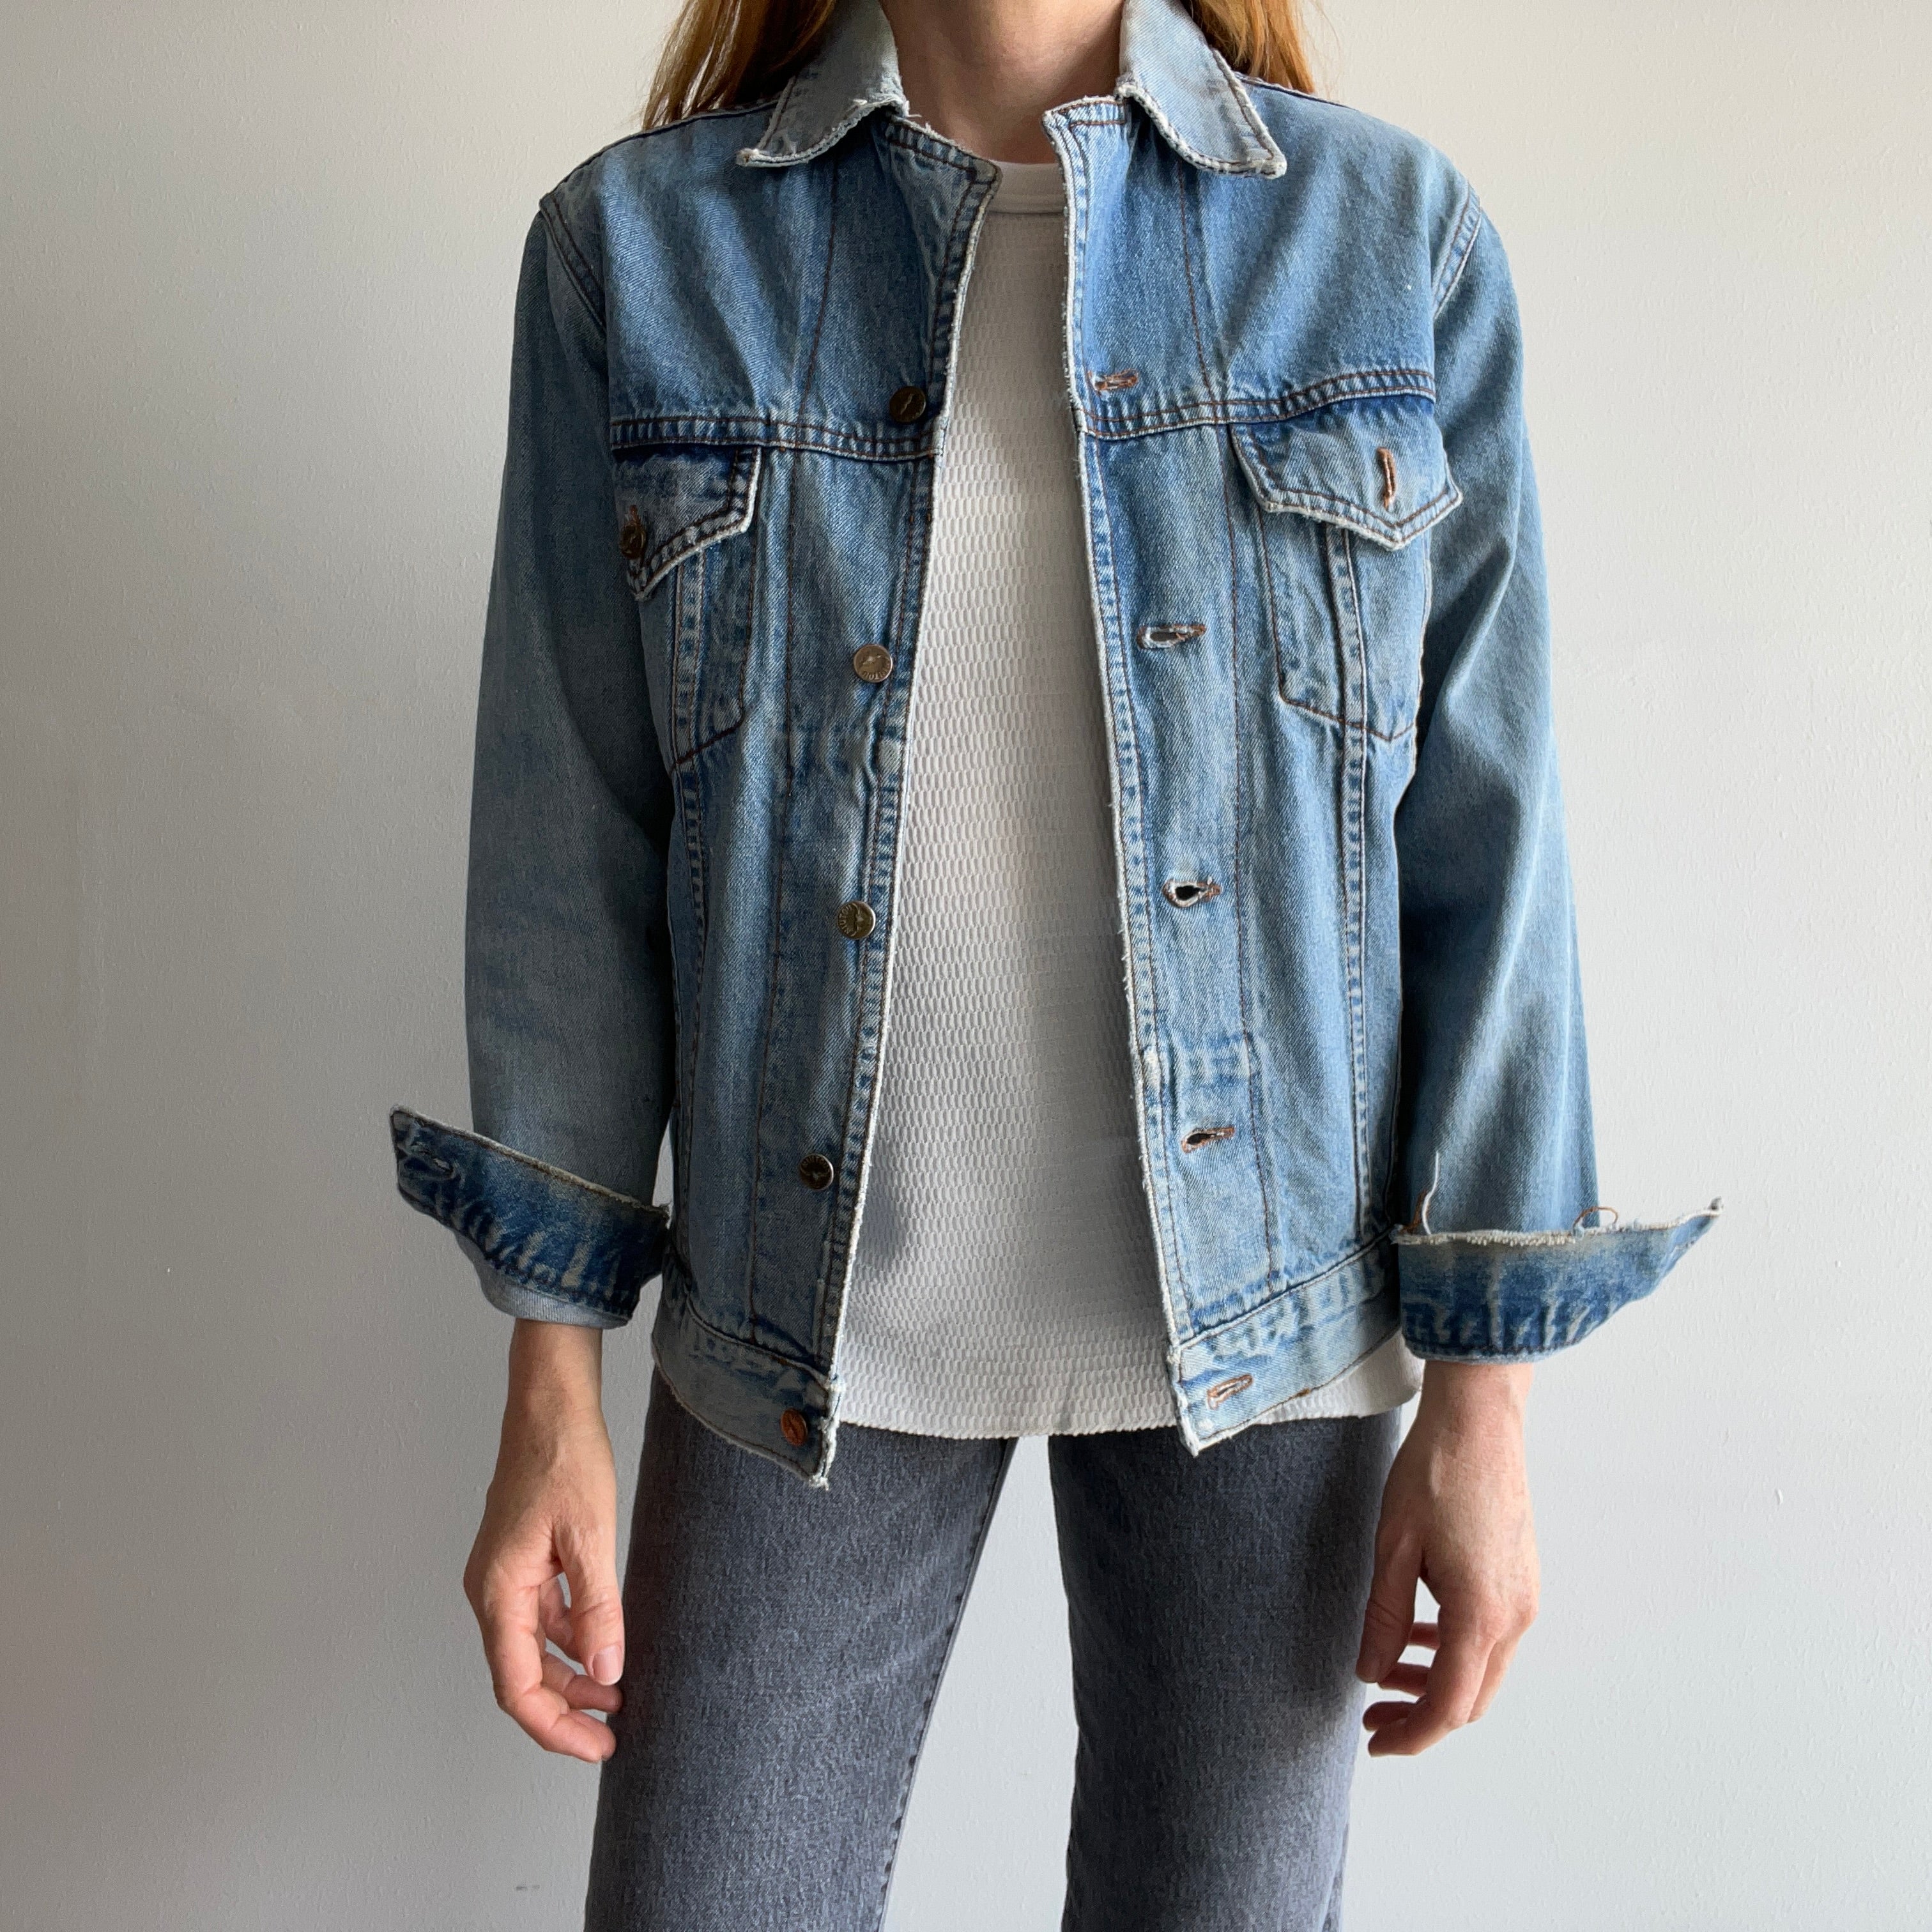 1980s Nicely Thrashed Niutou Denim Jean Jacket (Missing Left Chest Button)